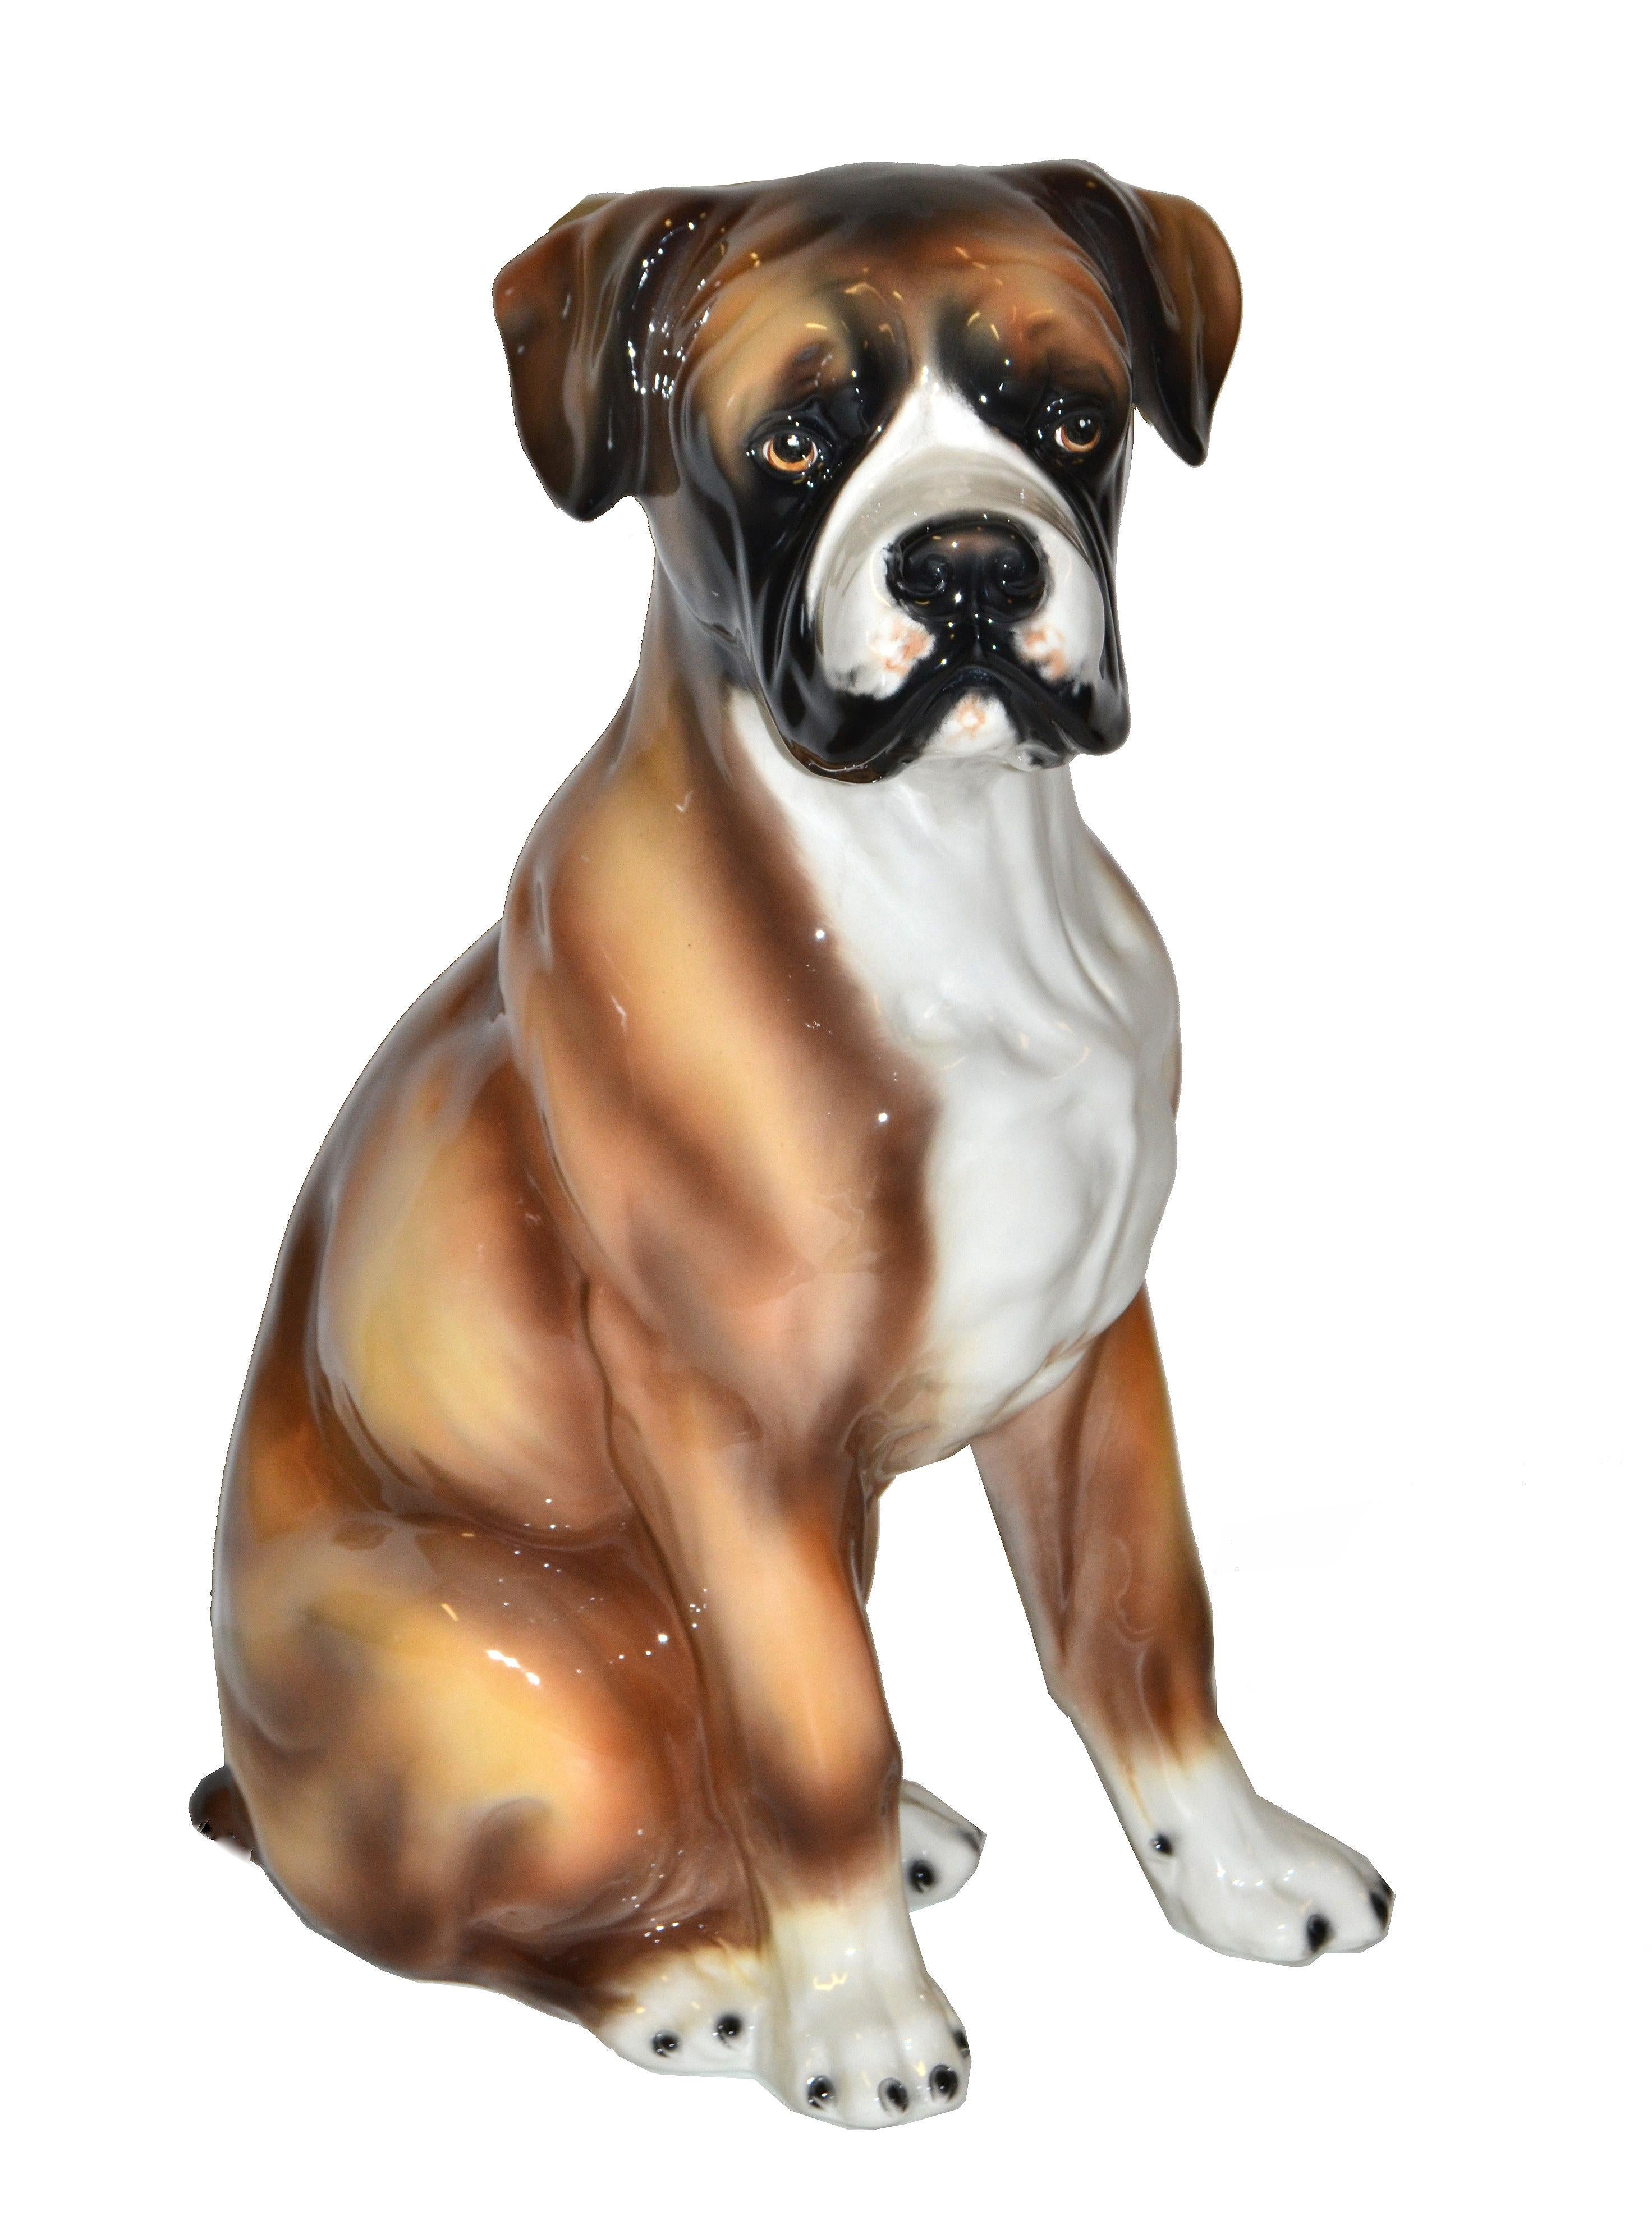 Stunning Carraro Collection glazed Italian ceramic life-size hand-painted dog statue, animal sculpture.
Signed underneath hand-painted and made in Italy.
 